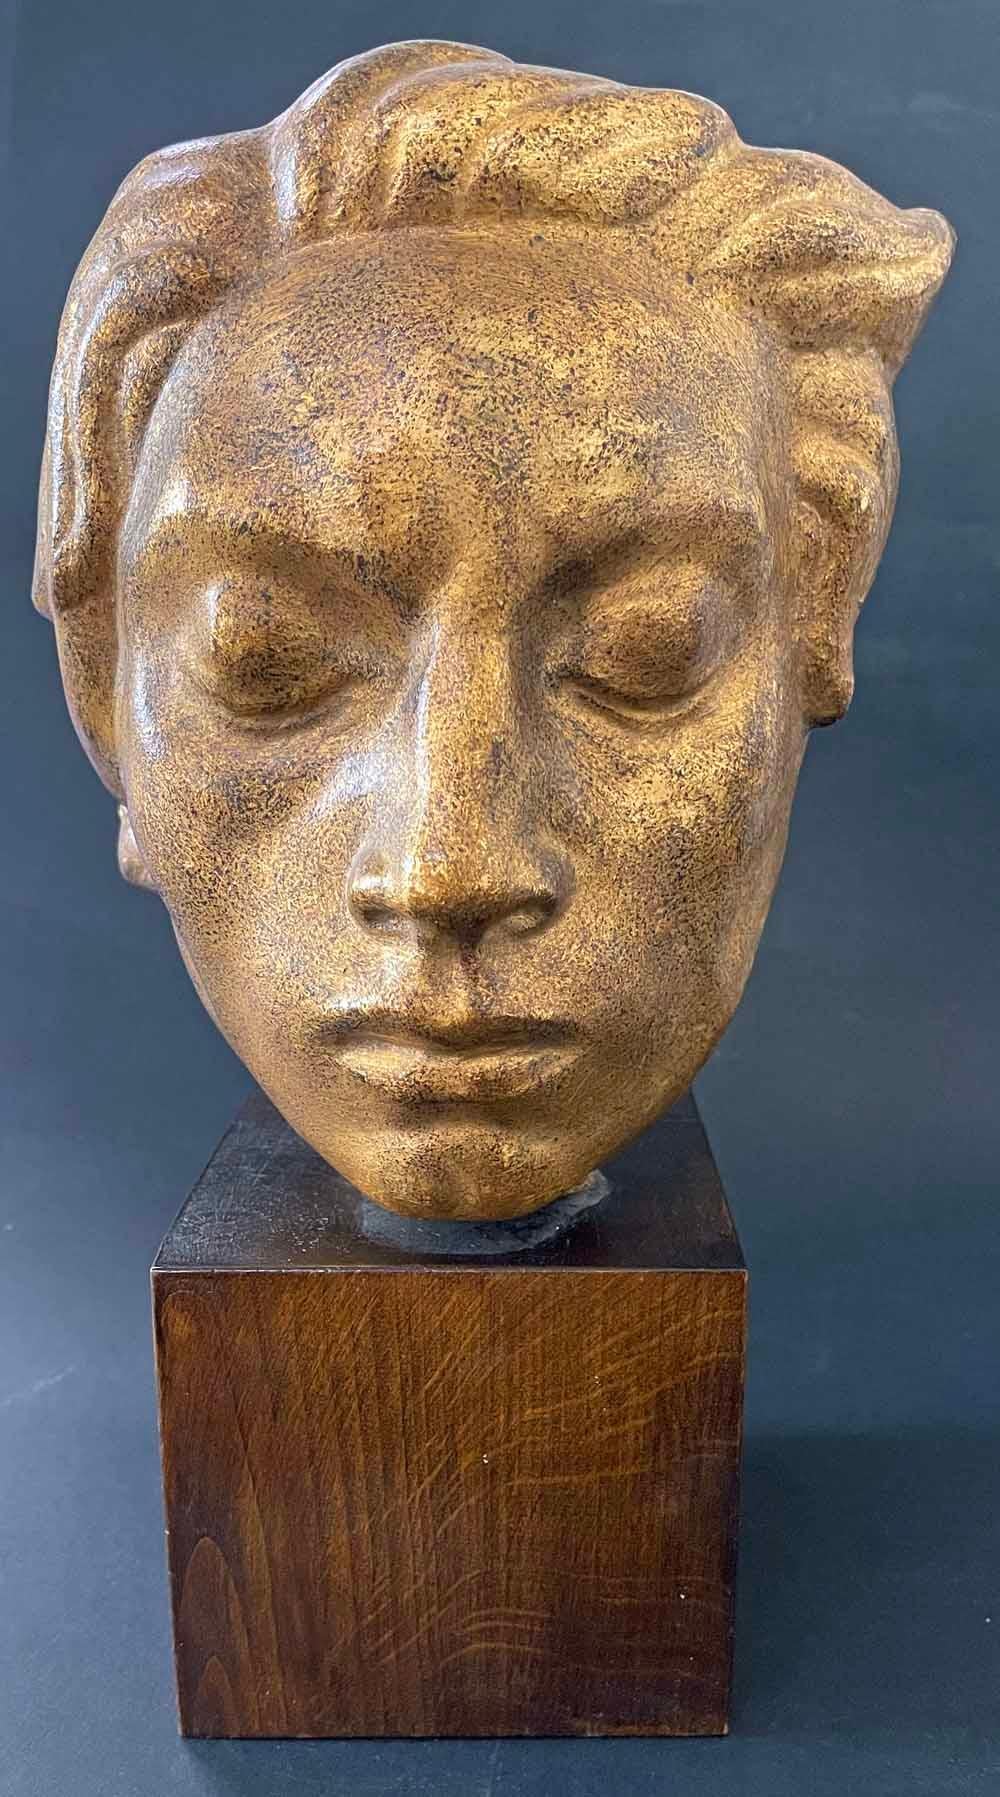 This strong, placid visage of a young man, eyes closed and hair flowing, was sculpted by John Lundqvist, sometimes compared to Carl Milles, who was Sweden's leading sculptor in the early 20th century.  Lundqvist has given his subject a rich, gilded